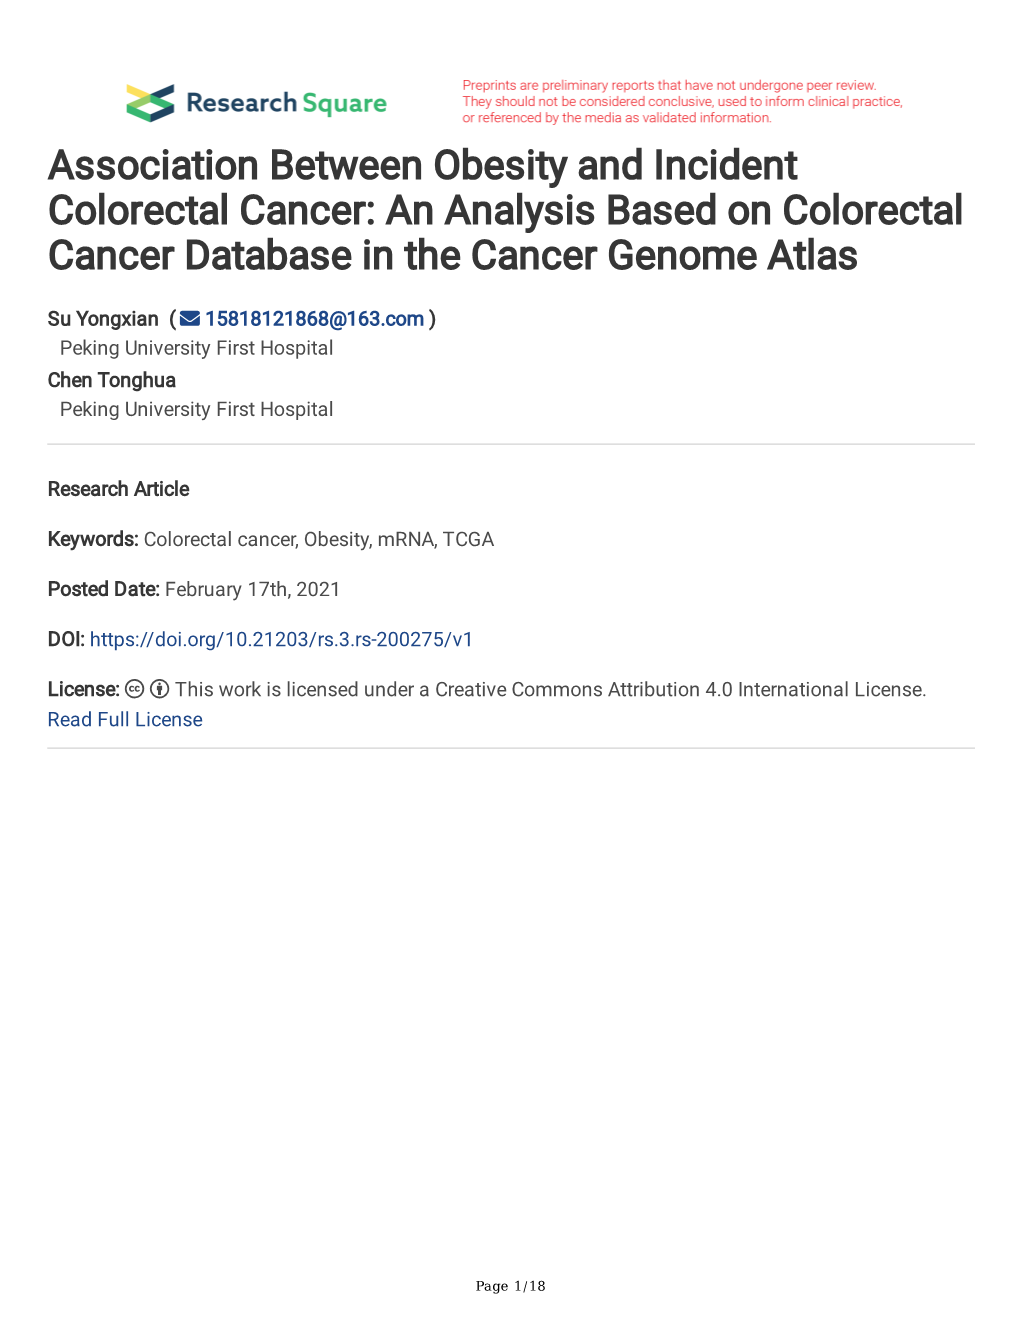 Association Between Obesity and Incident Colorectal Cancer: an Analysis Based on Colorectal Cancer Database in the Cancer Genome Atlas